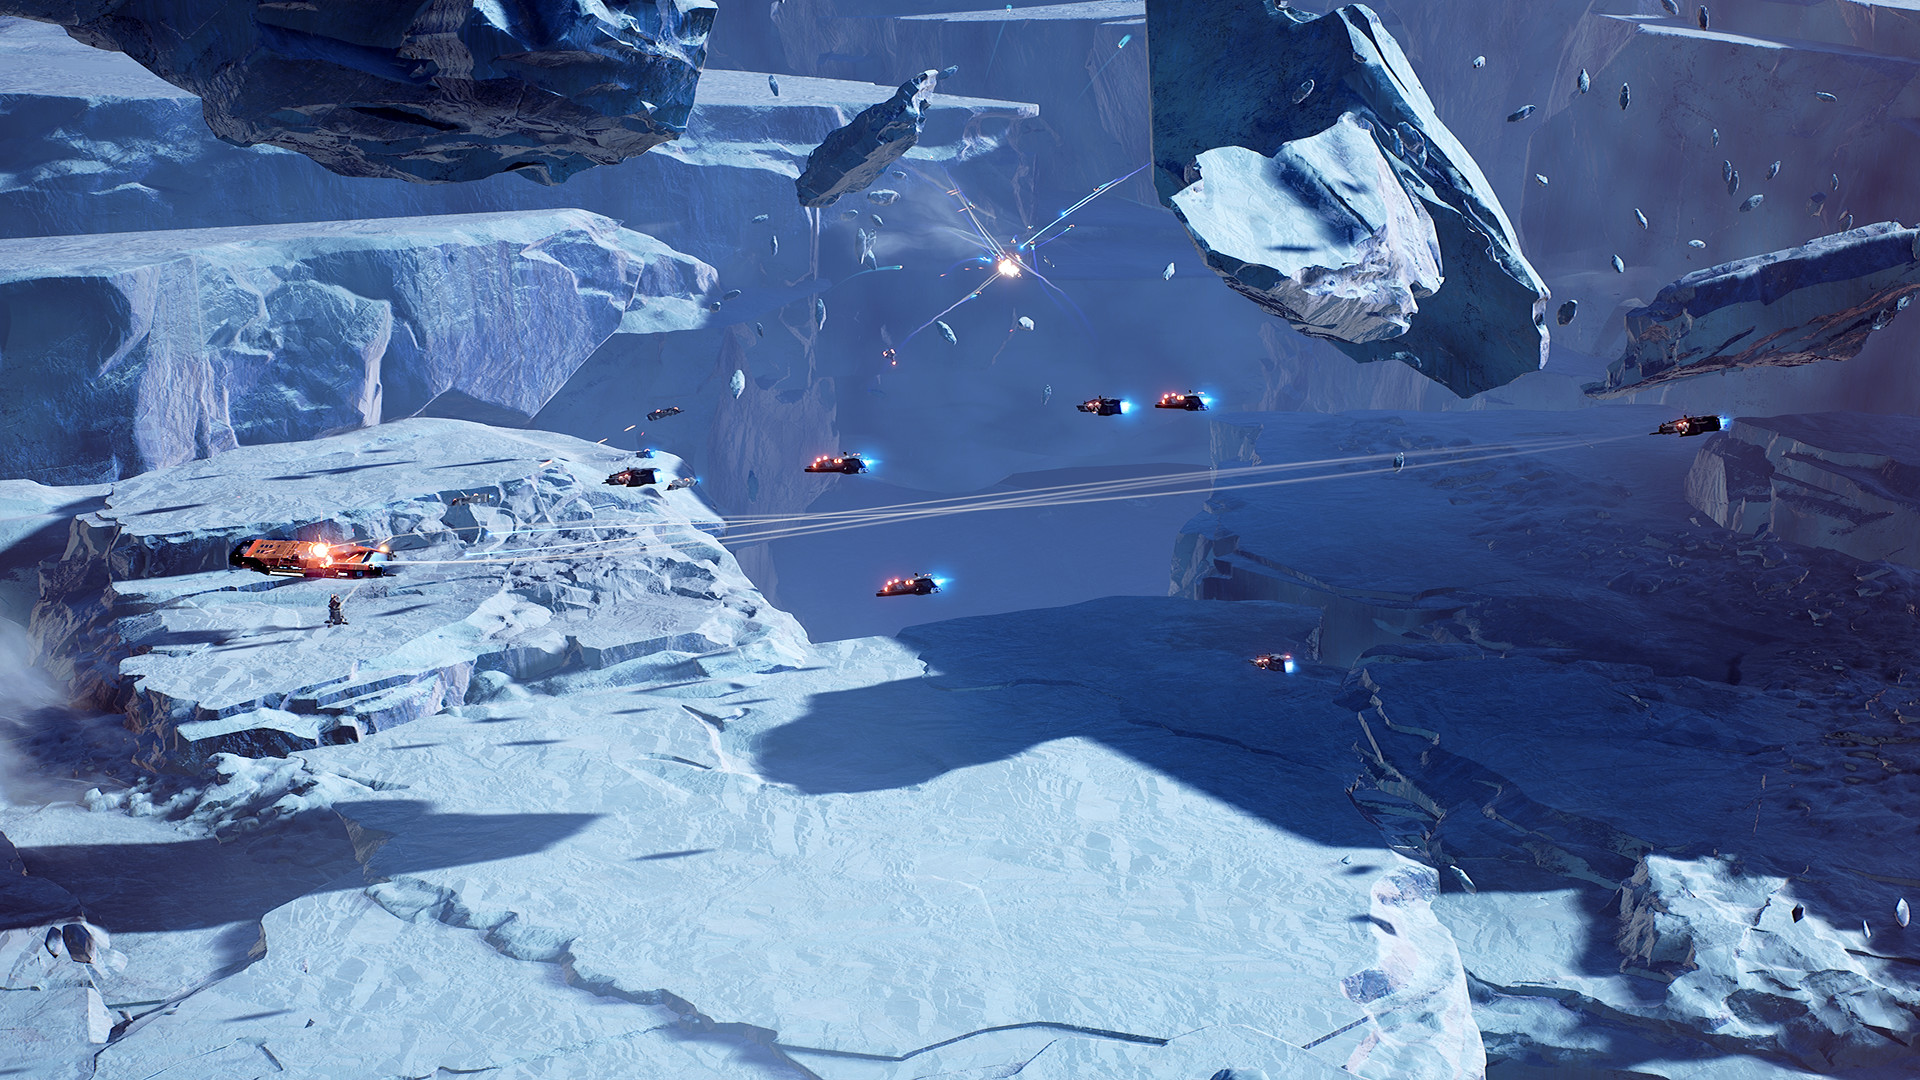 Ships flying over an ice planet.